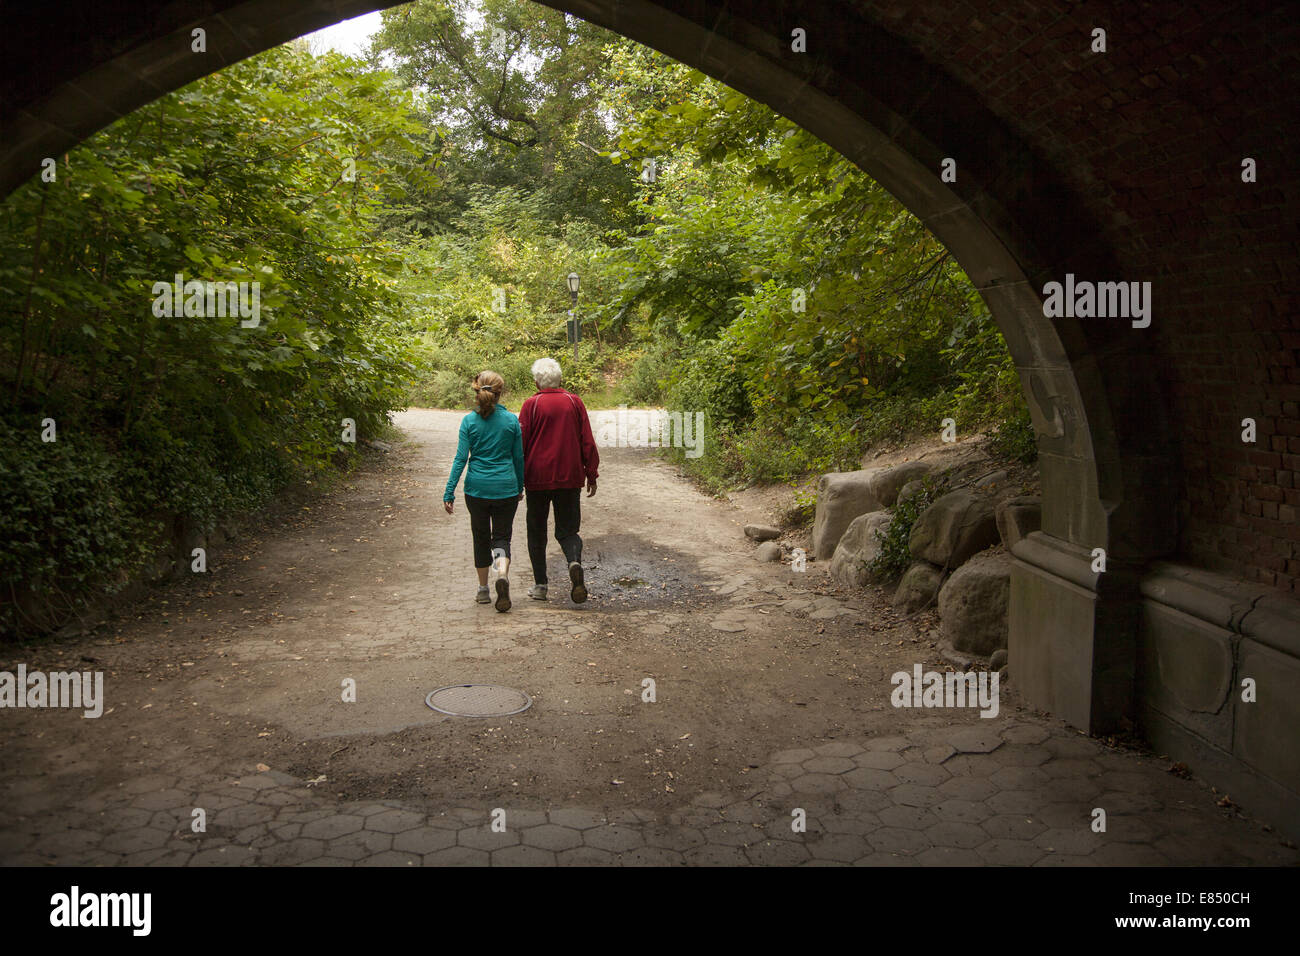 Older couple walk hand in hand in Prospect Park, Brooklyn, NY. Stock Photo